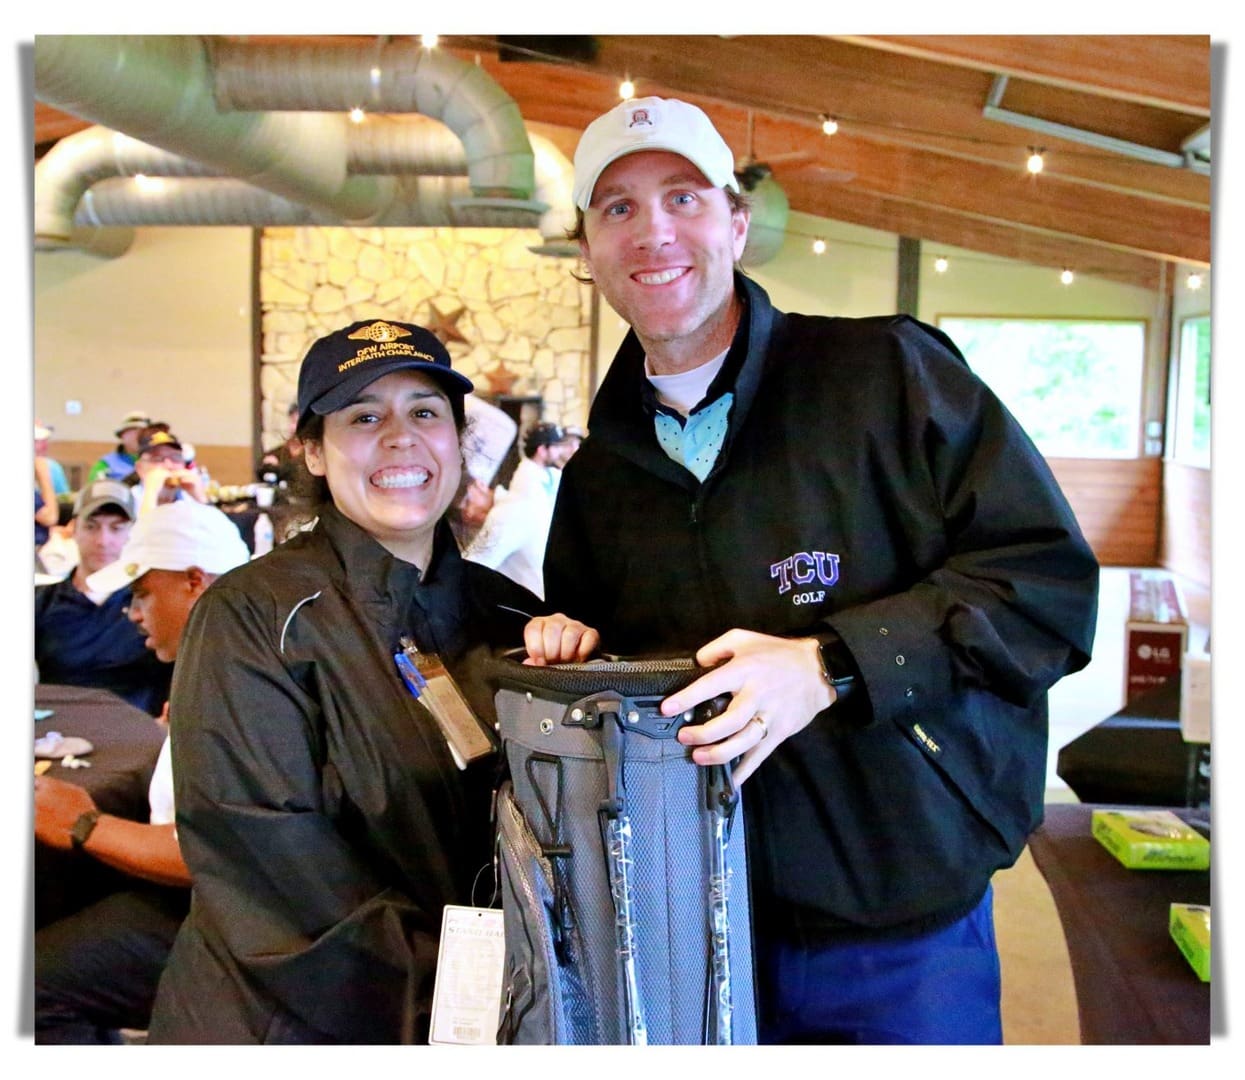 A man and woman posing with a golf bag.